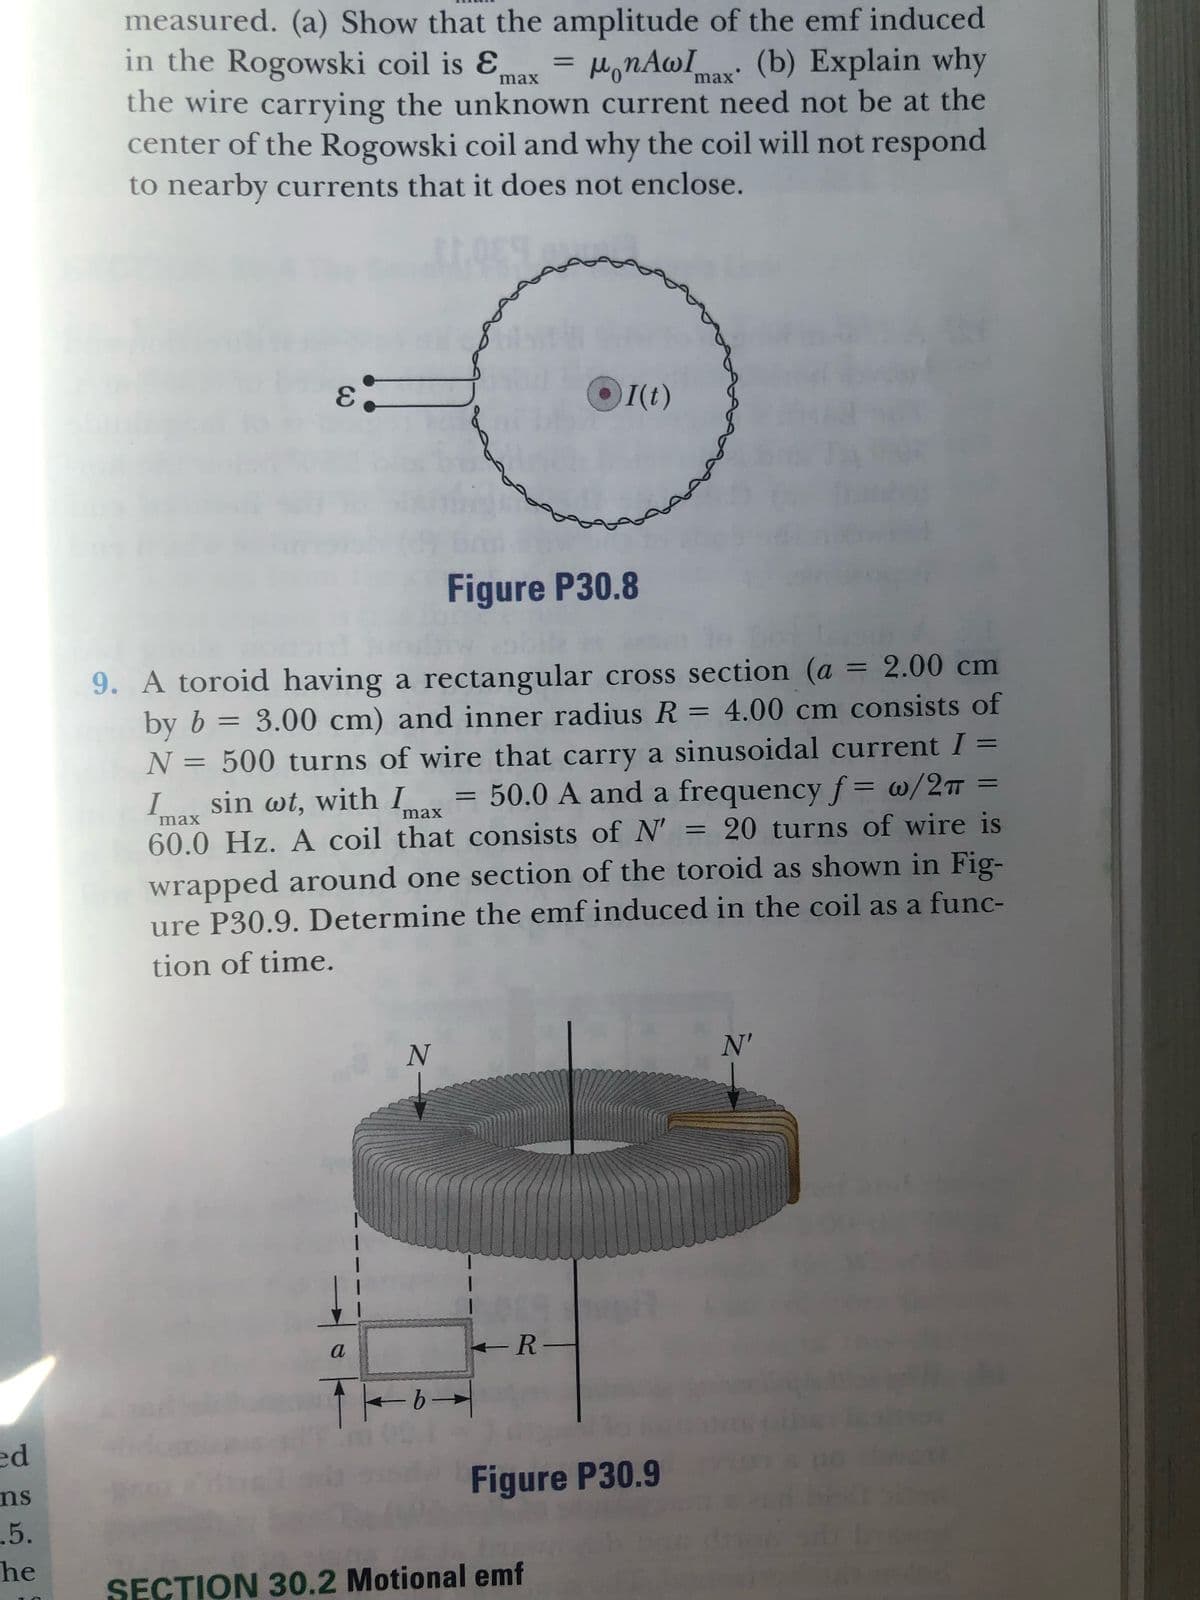 ed
ns
.5.
he
measured. (a) Show that the amplitude of the emf induced
in the Rogowski coil is Ɛ
max
=
μonAwImax (b) Explain why
the wire carrying the unknown current need not be at the
center of the Rogowski coil and why the coil will not respond
to nearby currents that it does not enclose.
E
ɛ.
●I(t)
Figure P30.8
I
-
9. A toroid having a rectangular cross section (a = 2.00 cm
3.00 cm) and inner radius R = 4.00 cm consists of
by b
N = 500 turns of wire that carry a sinusoidal current I
sin wt, with I = 50.0 A and a frequency f= w/2π =
60.0 Hz. A coil that consists of N' = 20 turns of wire is
wrapped around one section of the toroid as shown in Fig-
ure P30.9. Determine the emf induced in the coil as a func-
tion of time.
max
max
N
a
R-
-b-
Figure P30.9
SECTION 30.2 Motional emf
N'